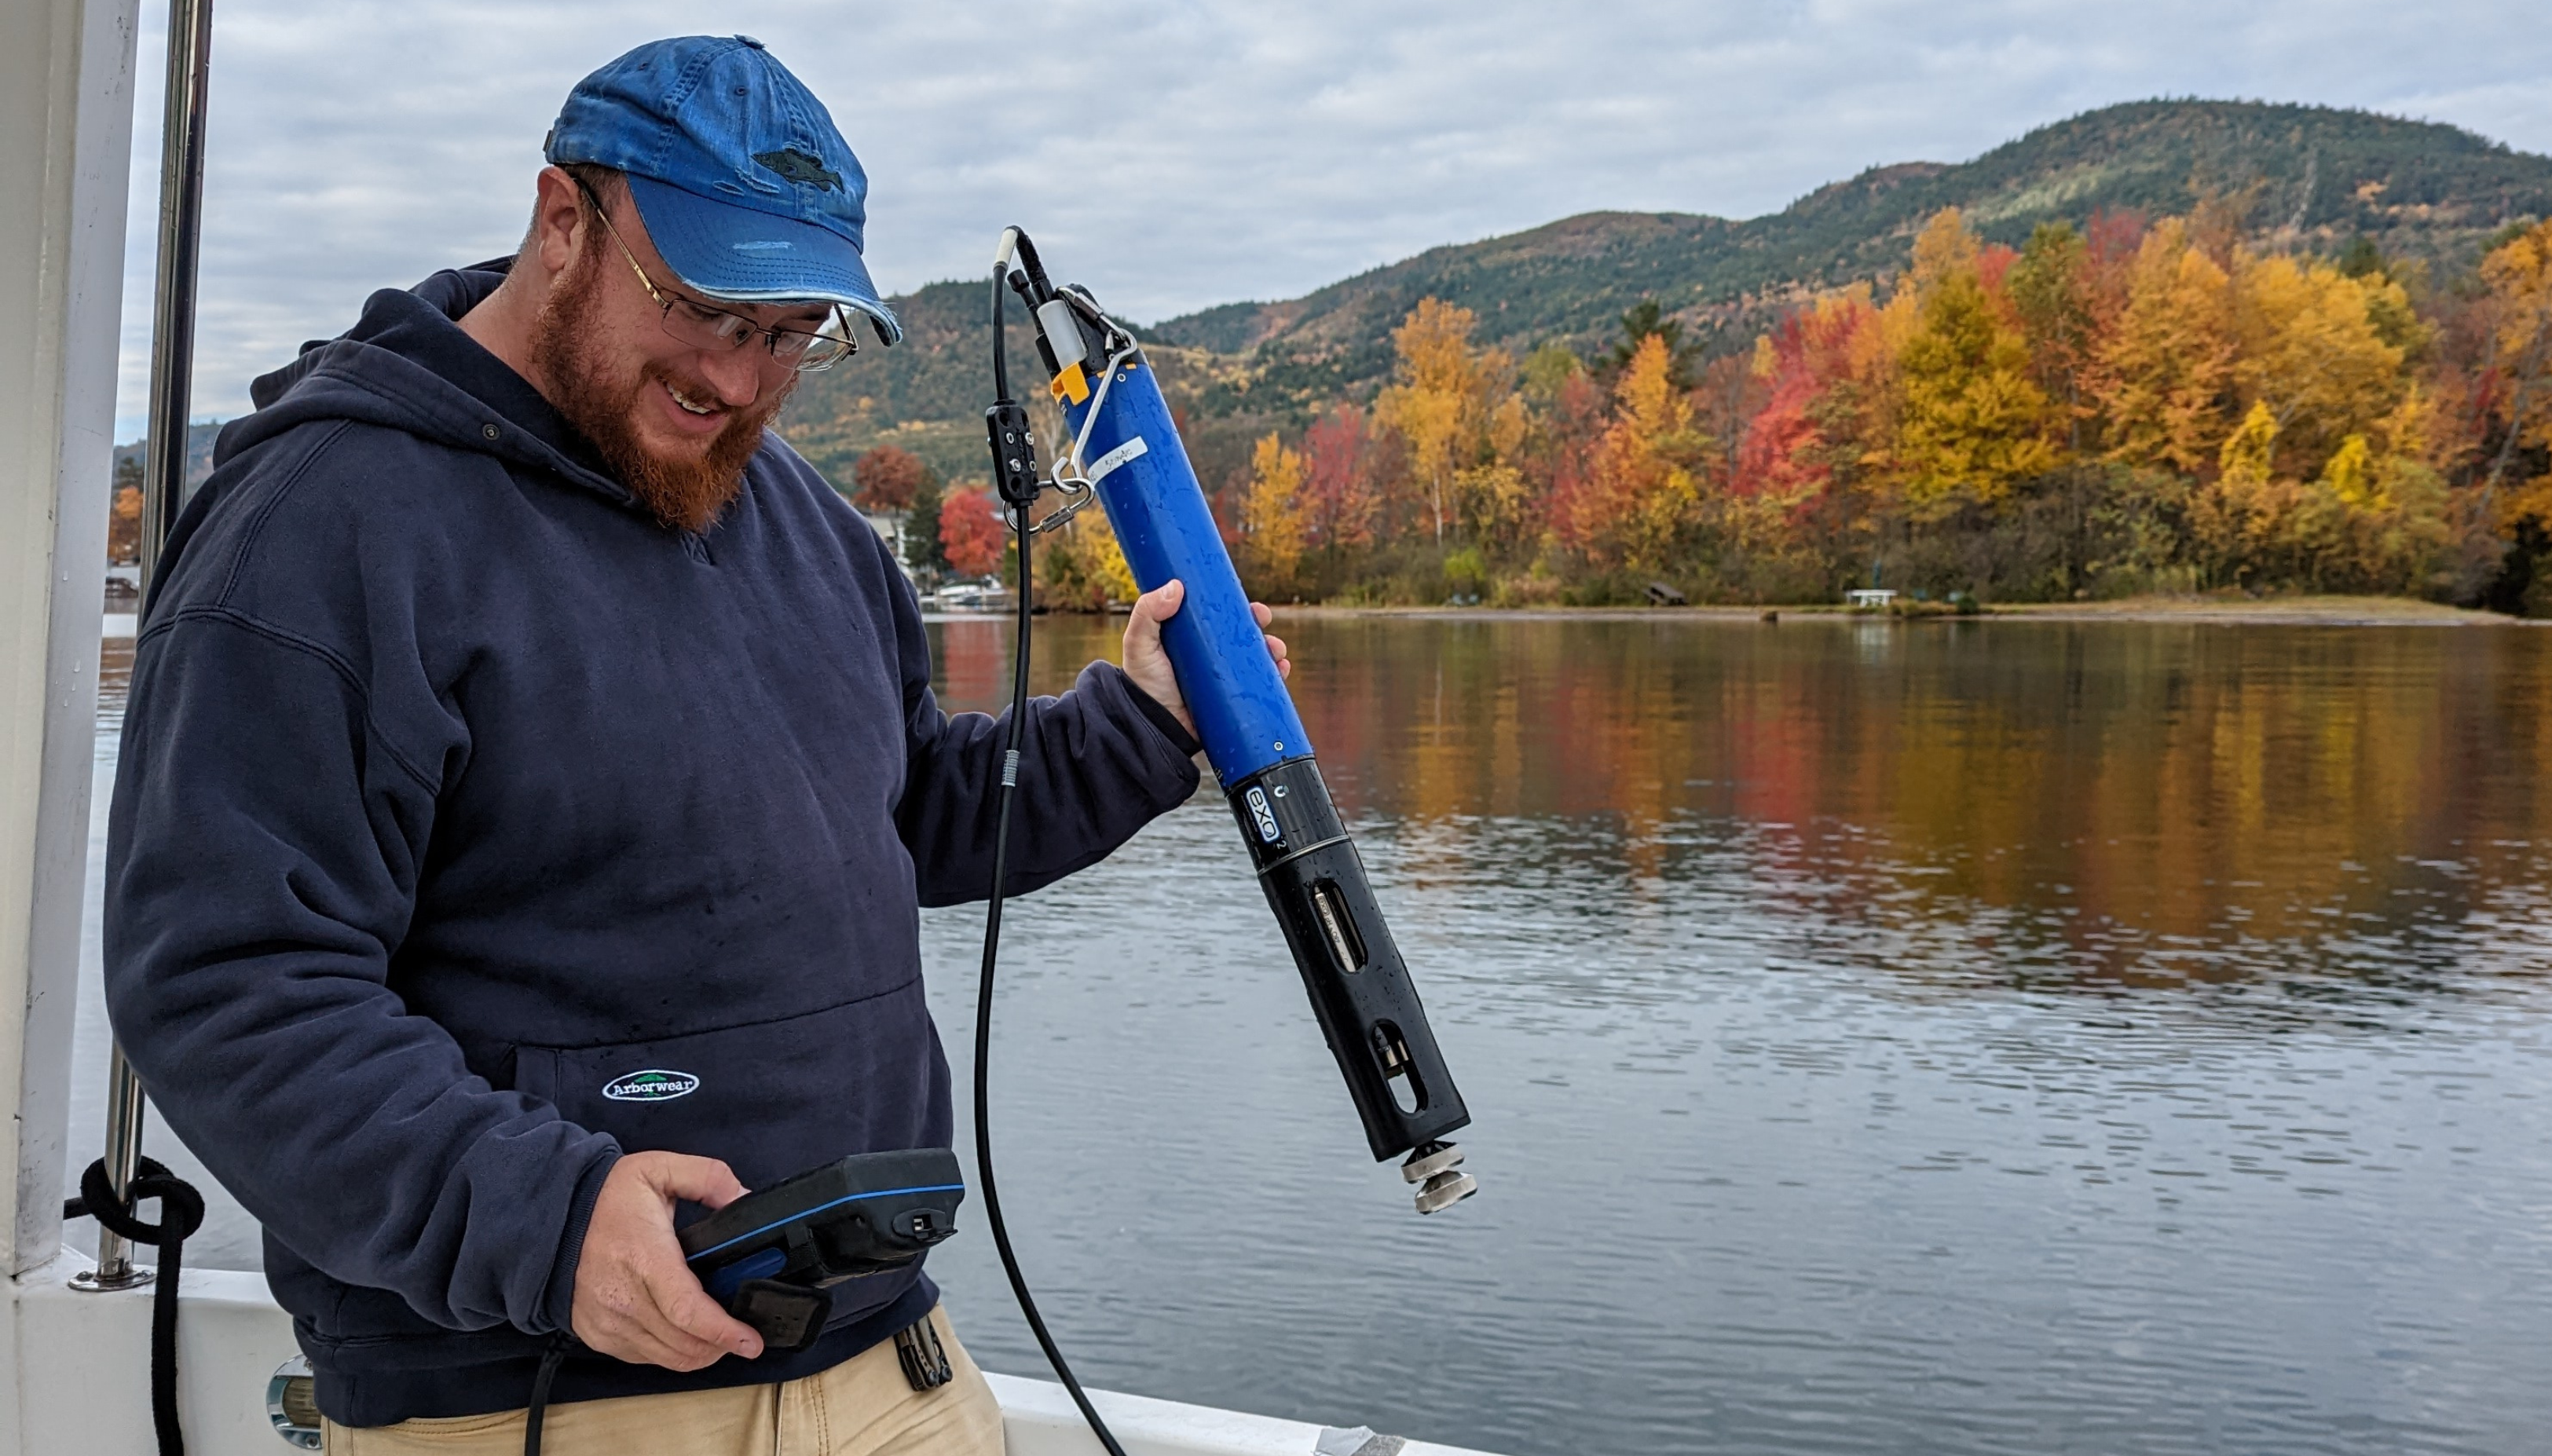 Researcher preparing to use water quality sensor pod with lake in the background